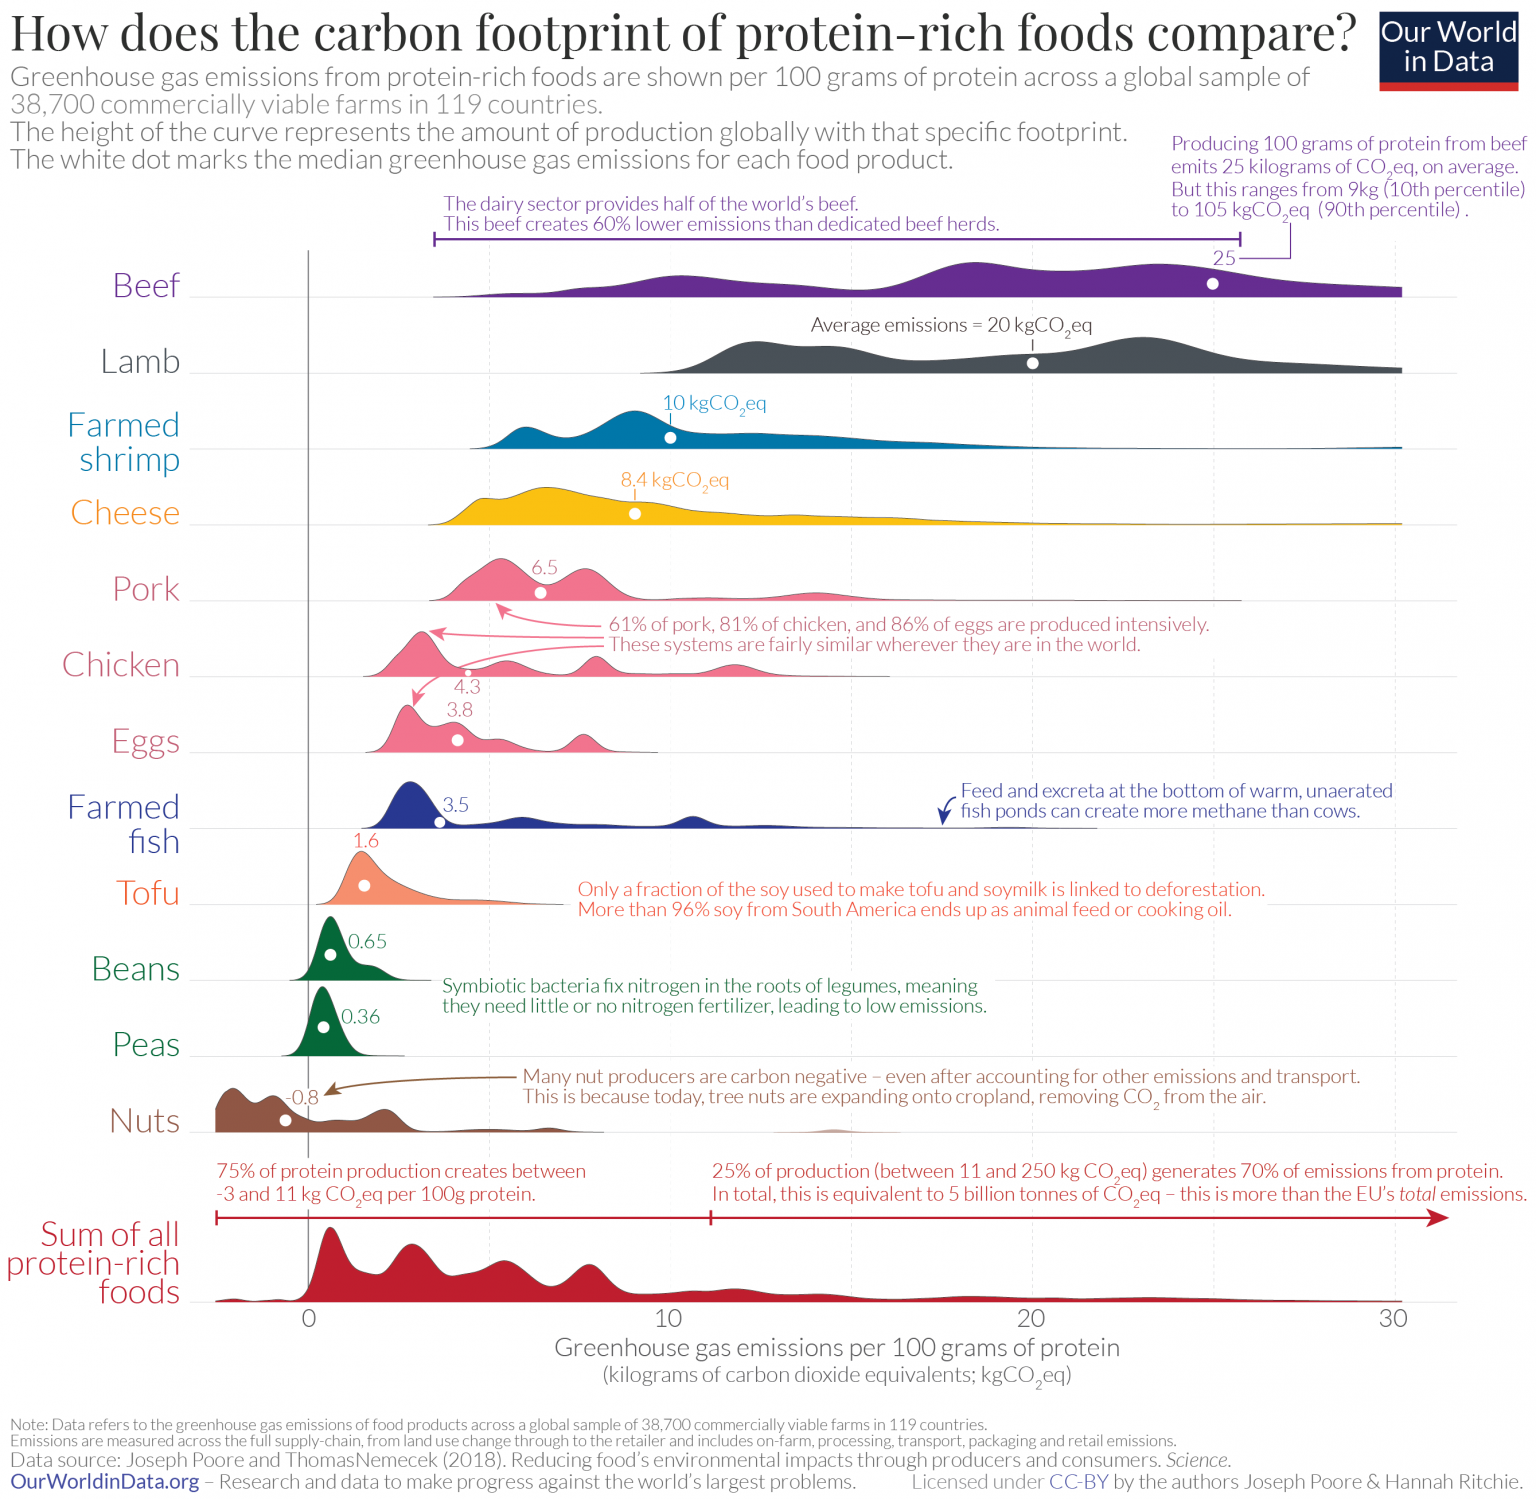 Carbon Footprint of Protein-Rich Foods